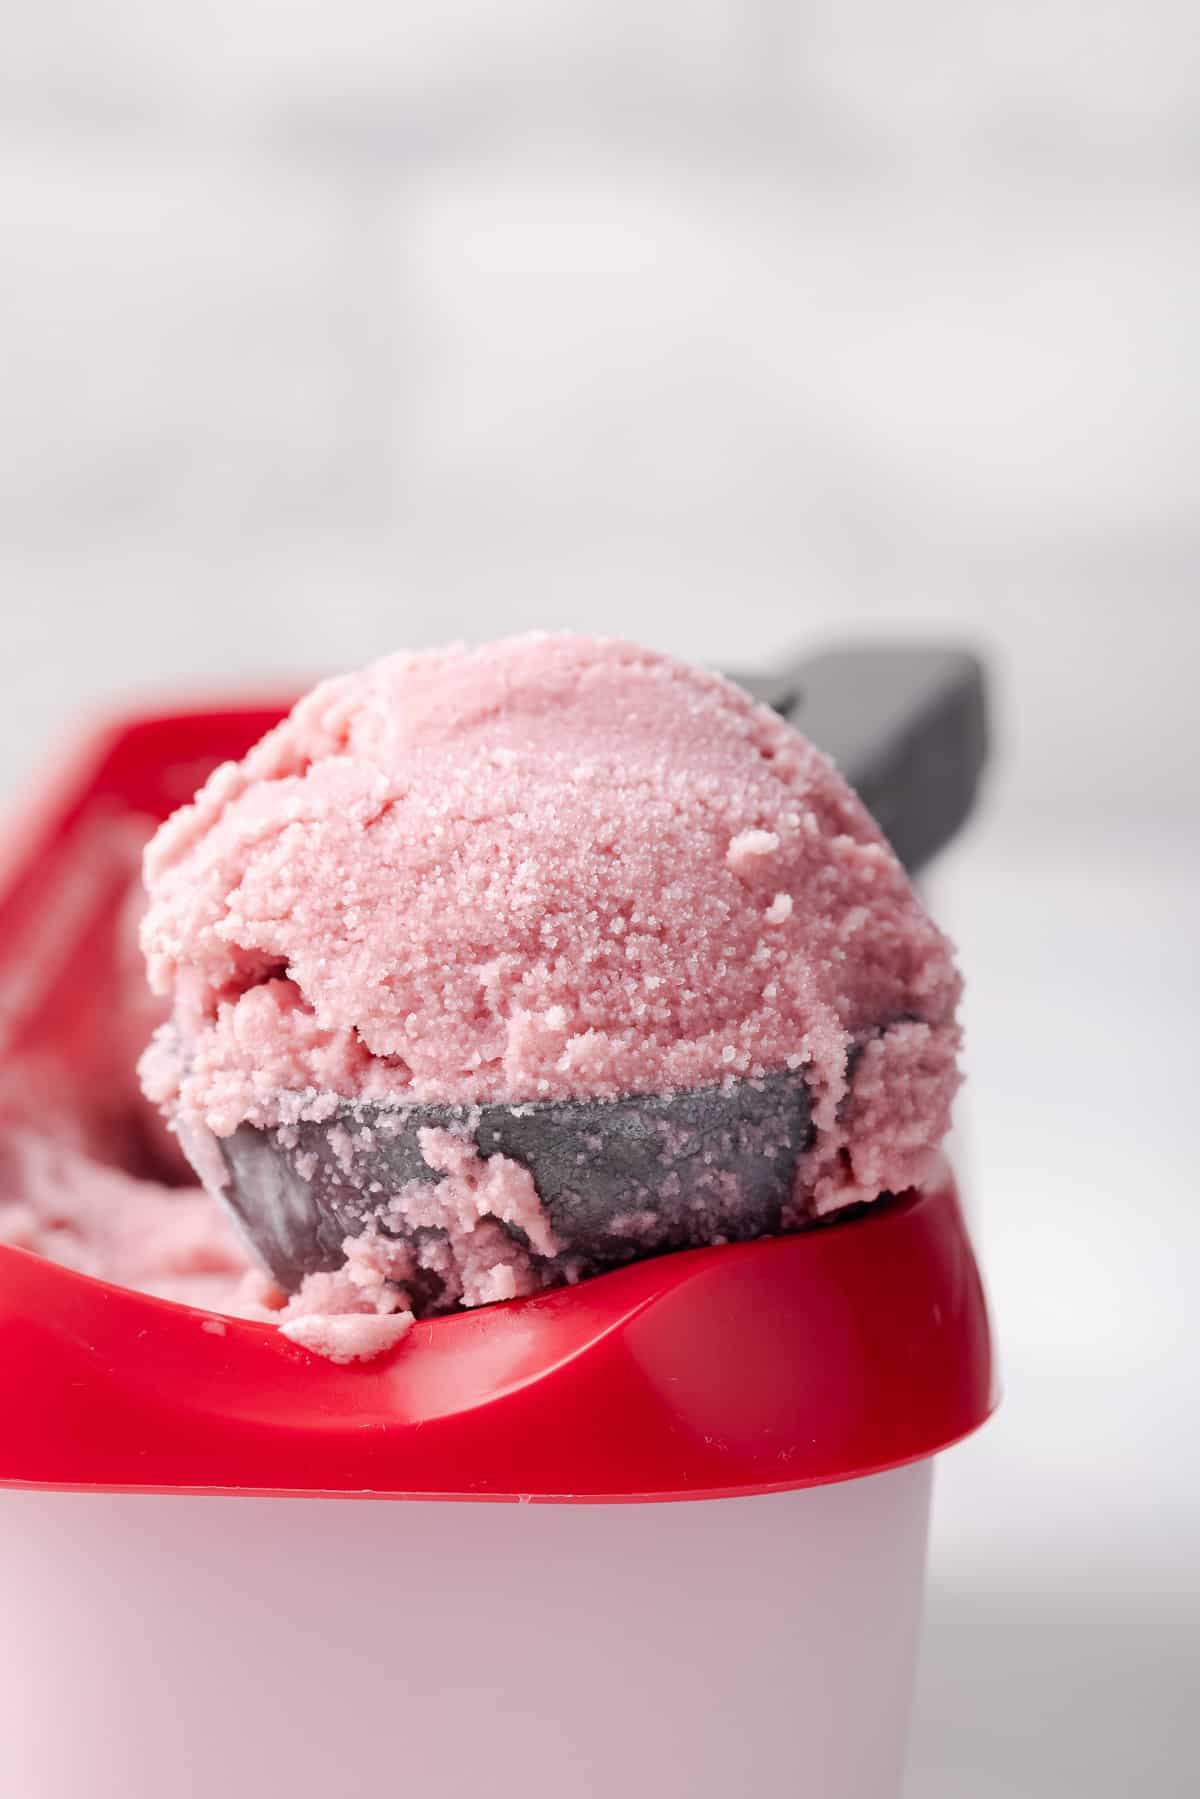 Side view of watermelon sorbet scooped into ice cream scoop.